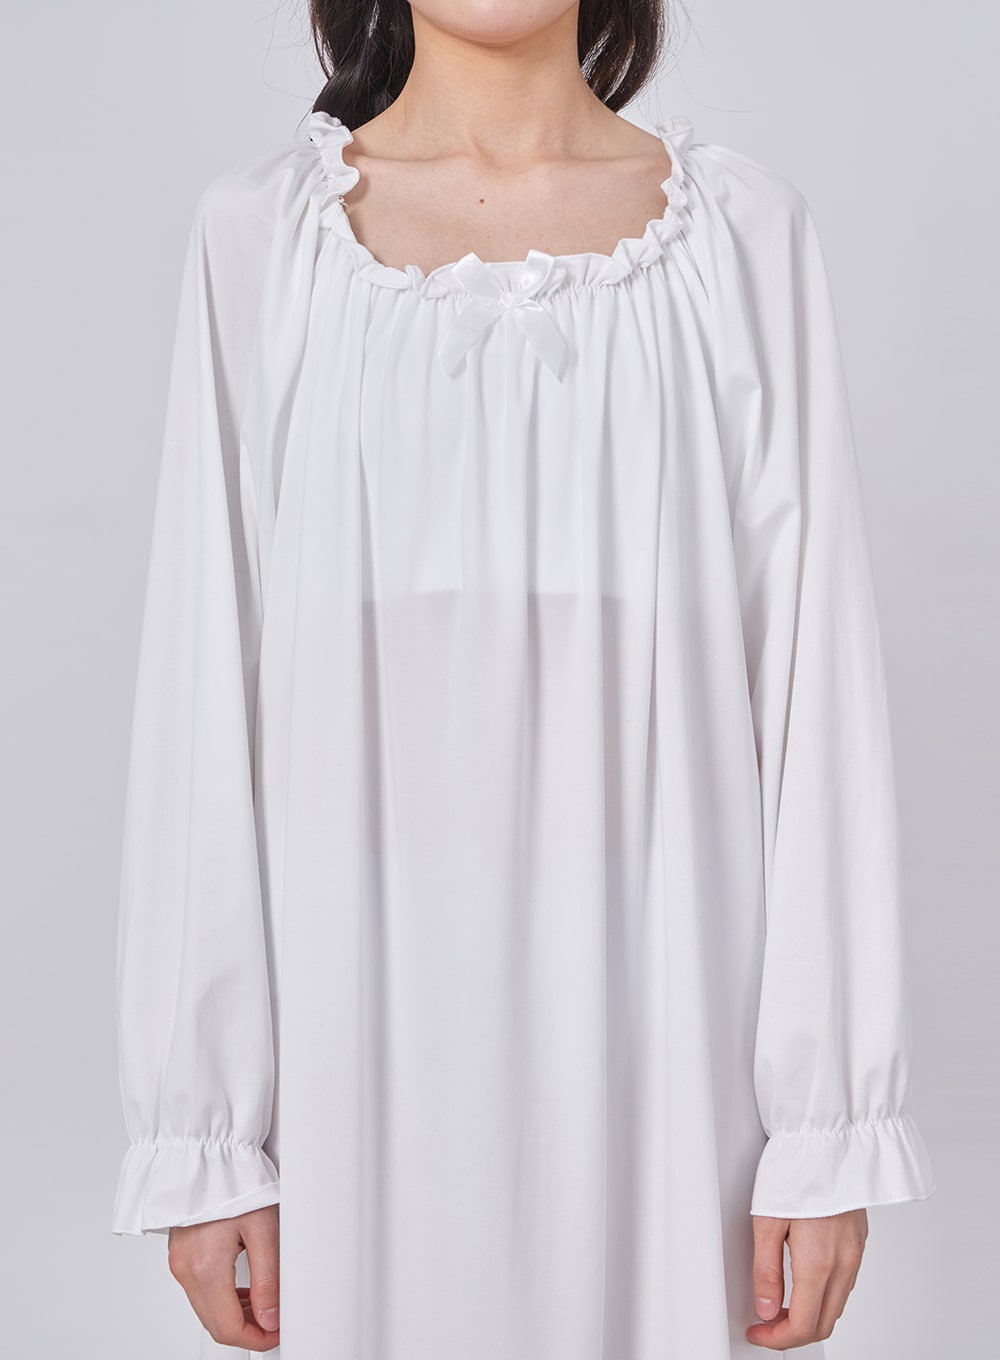 Frill Nightgown IF324